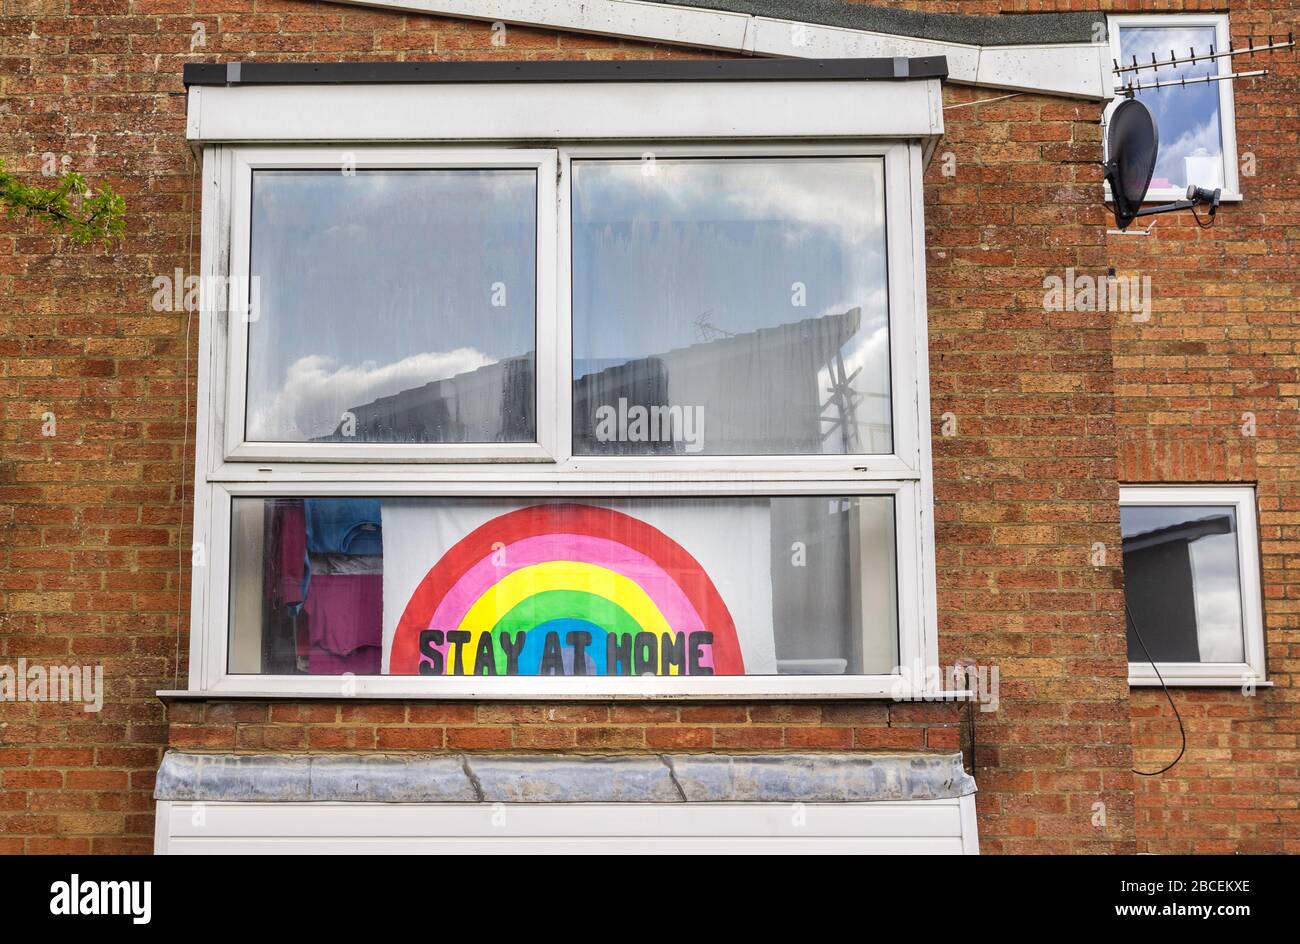 Banner with a 'Stay at home message' and a rainbow displayed in a window at the height of the coronavirus pandemic during lockdown in April 2020 at Southampton, England, UK Stock Photo